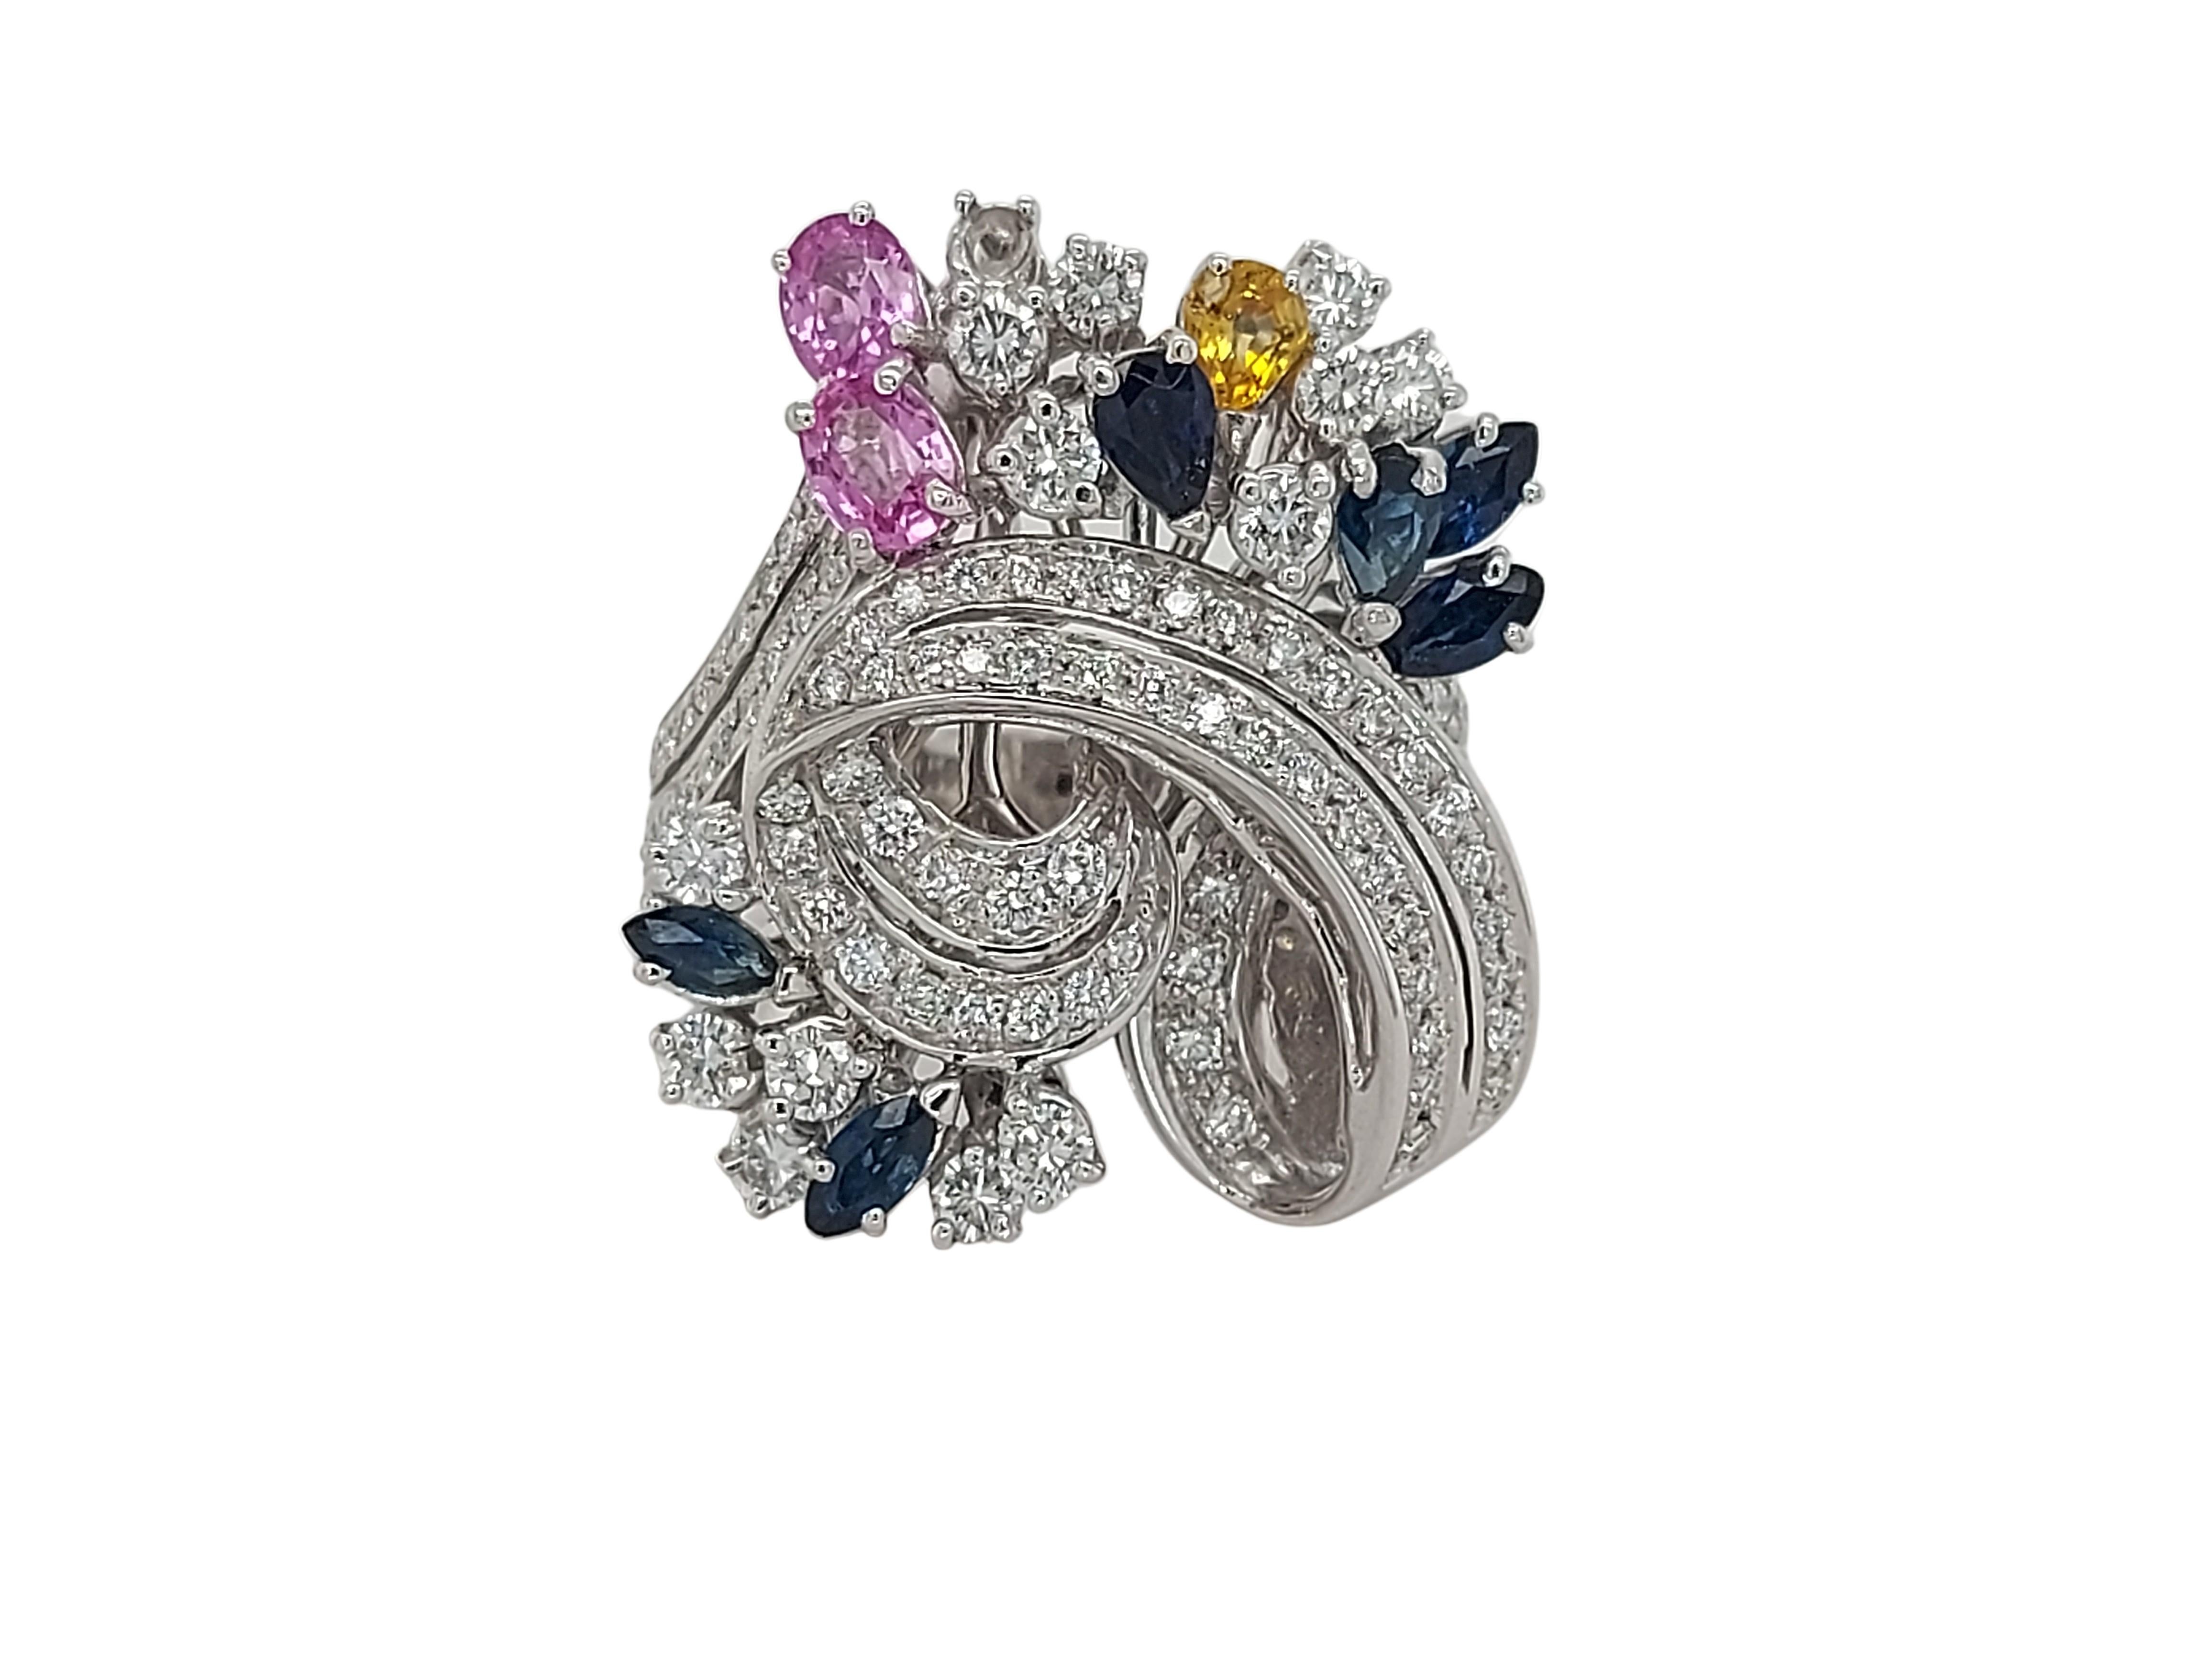 Original, Fun and Luxurious 18kt White Gold Ring With 2.25ct Diamonds & 1.30ct Pink, Yellow, Blue Sapphire

Diamonds: Brilliant cut diamonds, together approx. 2.25ct

Sapphires: Pink, yellow and blue sapphires, together approx. 1.30ct

Material: 18